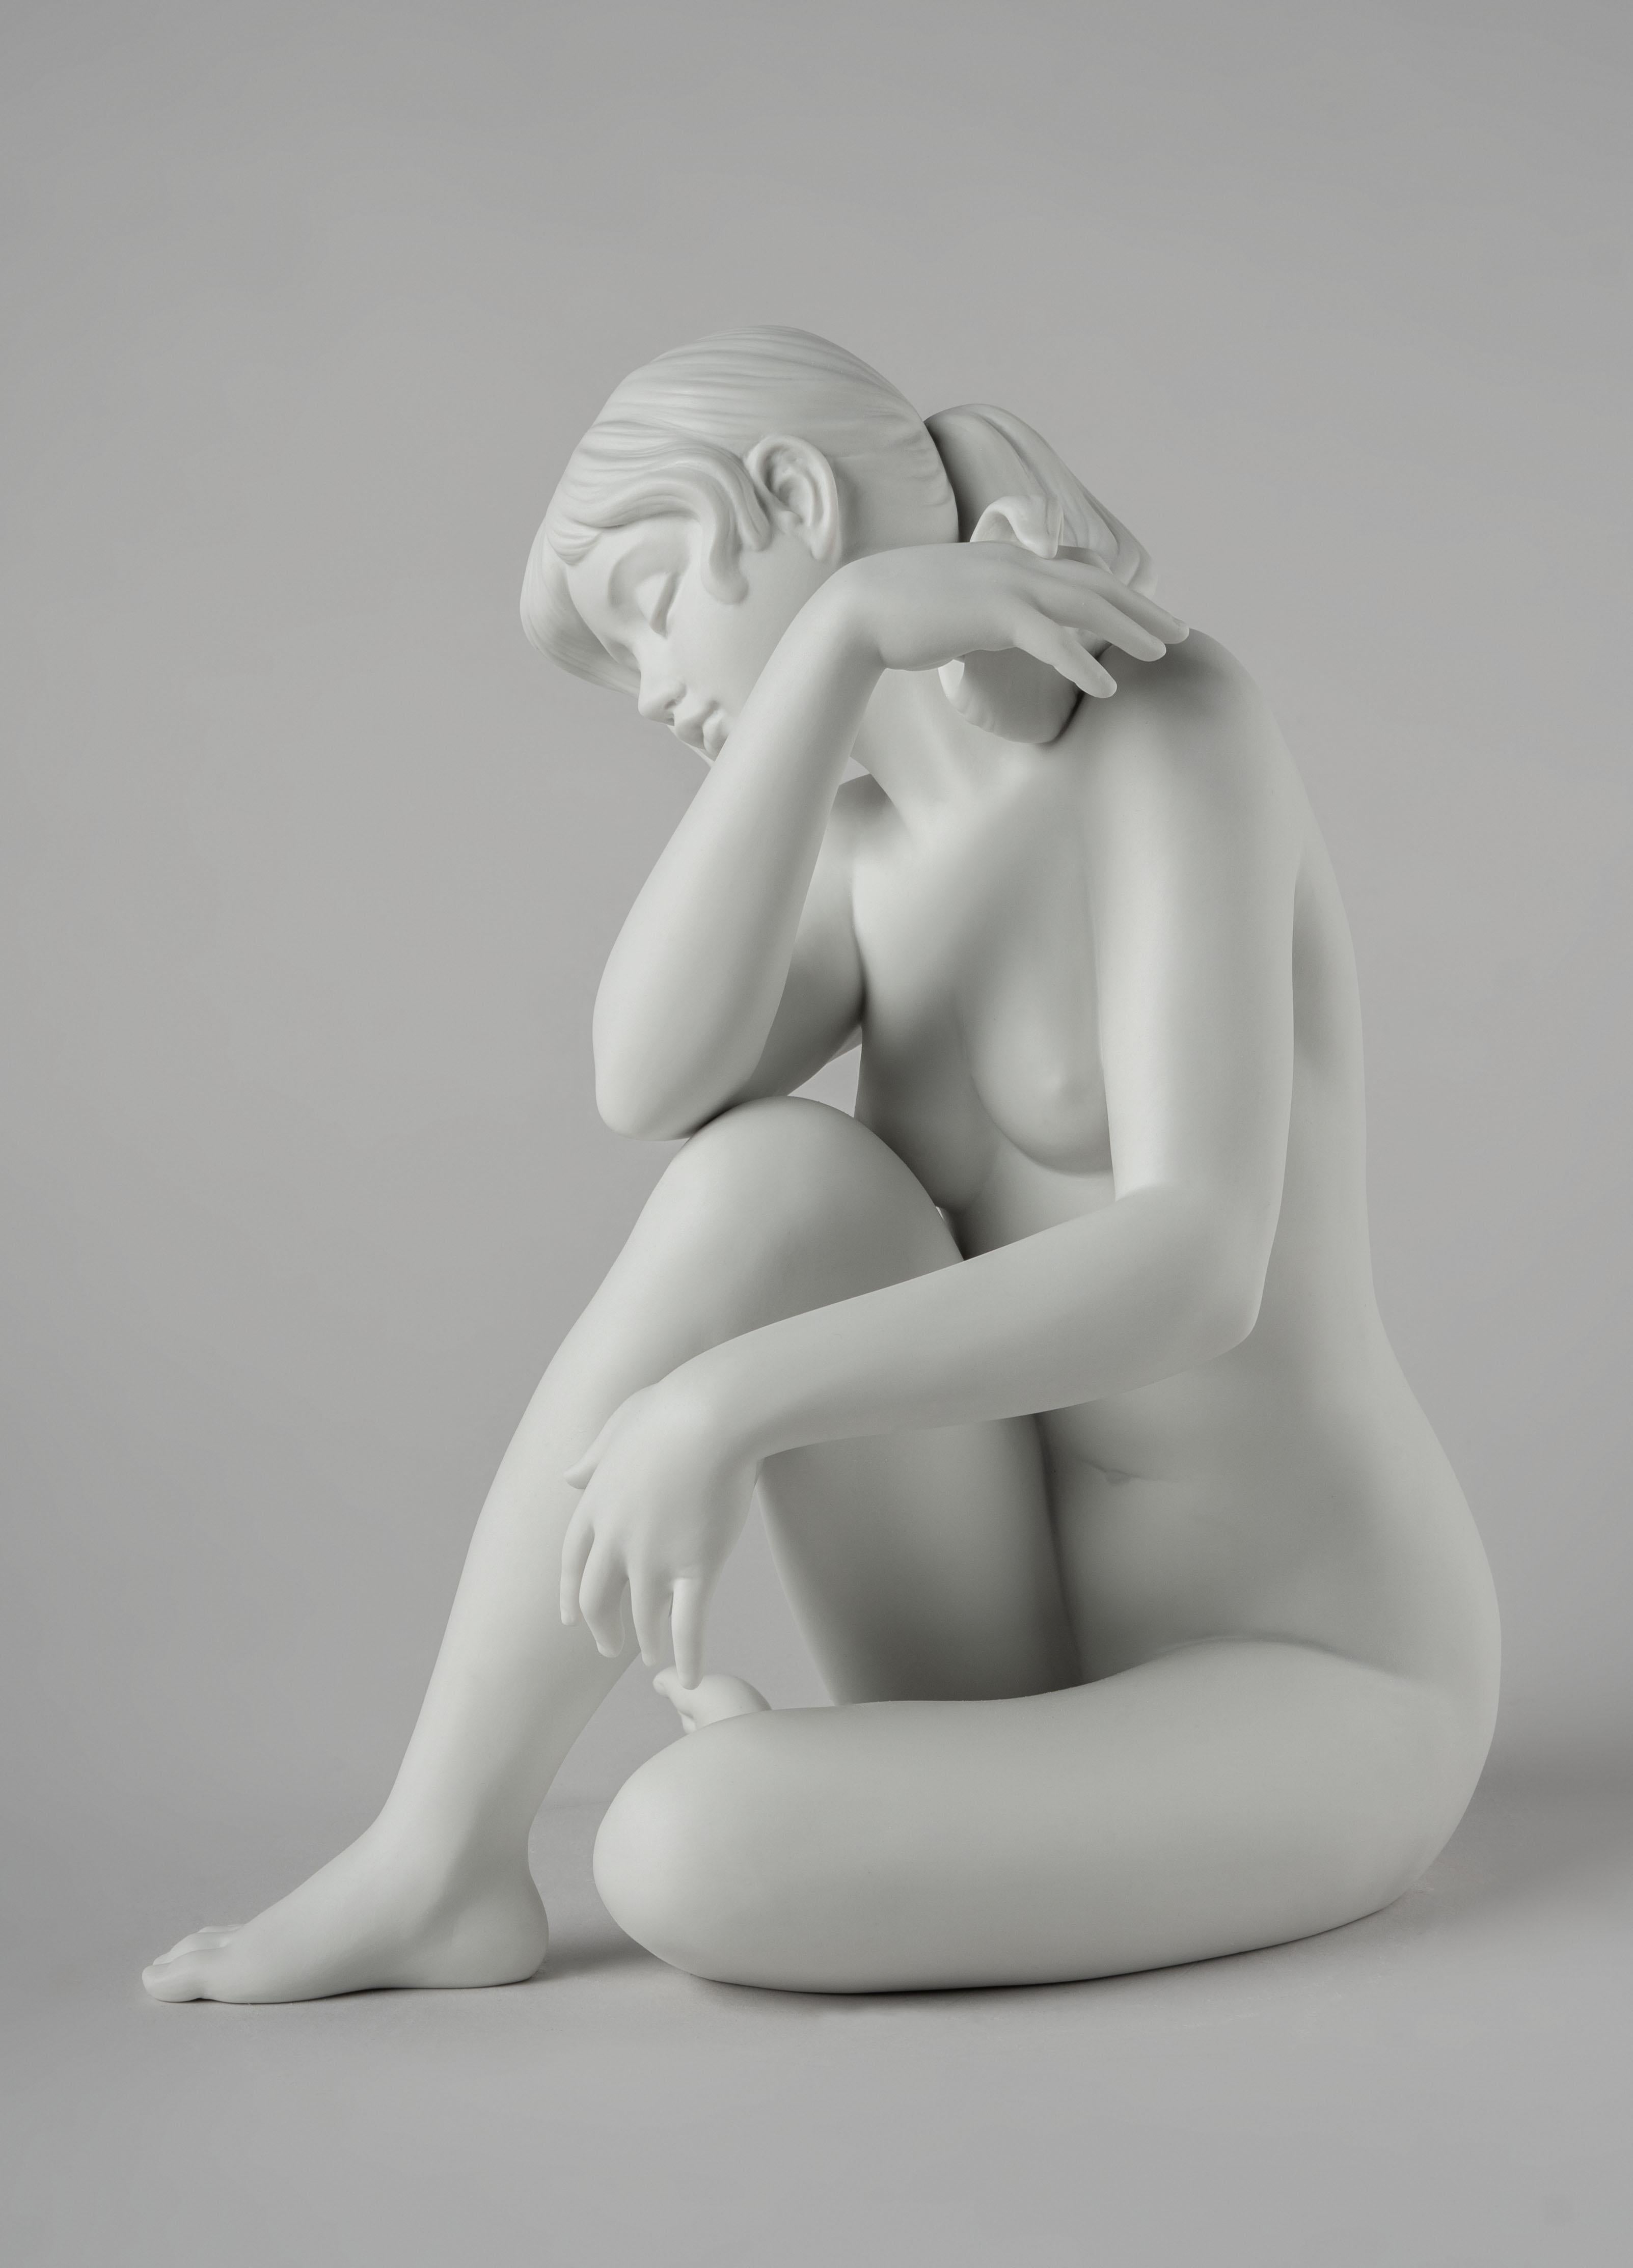 Pure harmony, peace and delicacy. A woman’s body portrayed in its most classical form, in this matte white porcelain creation. An evident example of the mastery and absolute control of composition and modelling of Lladró sculptors.